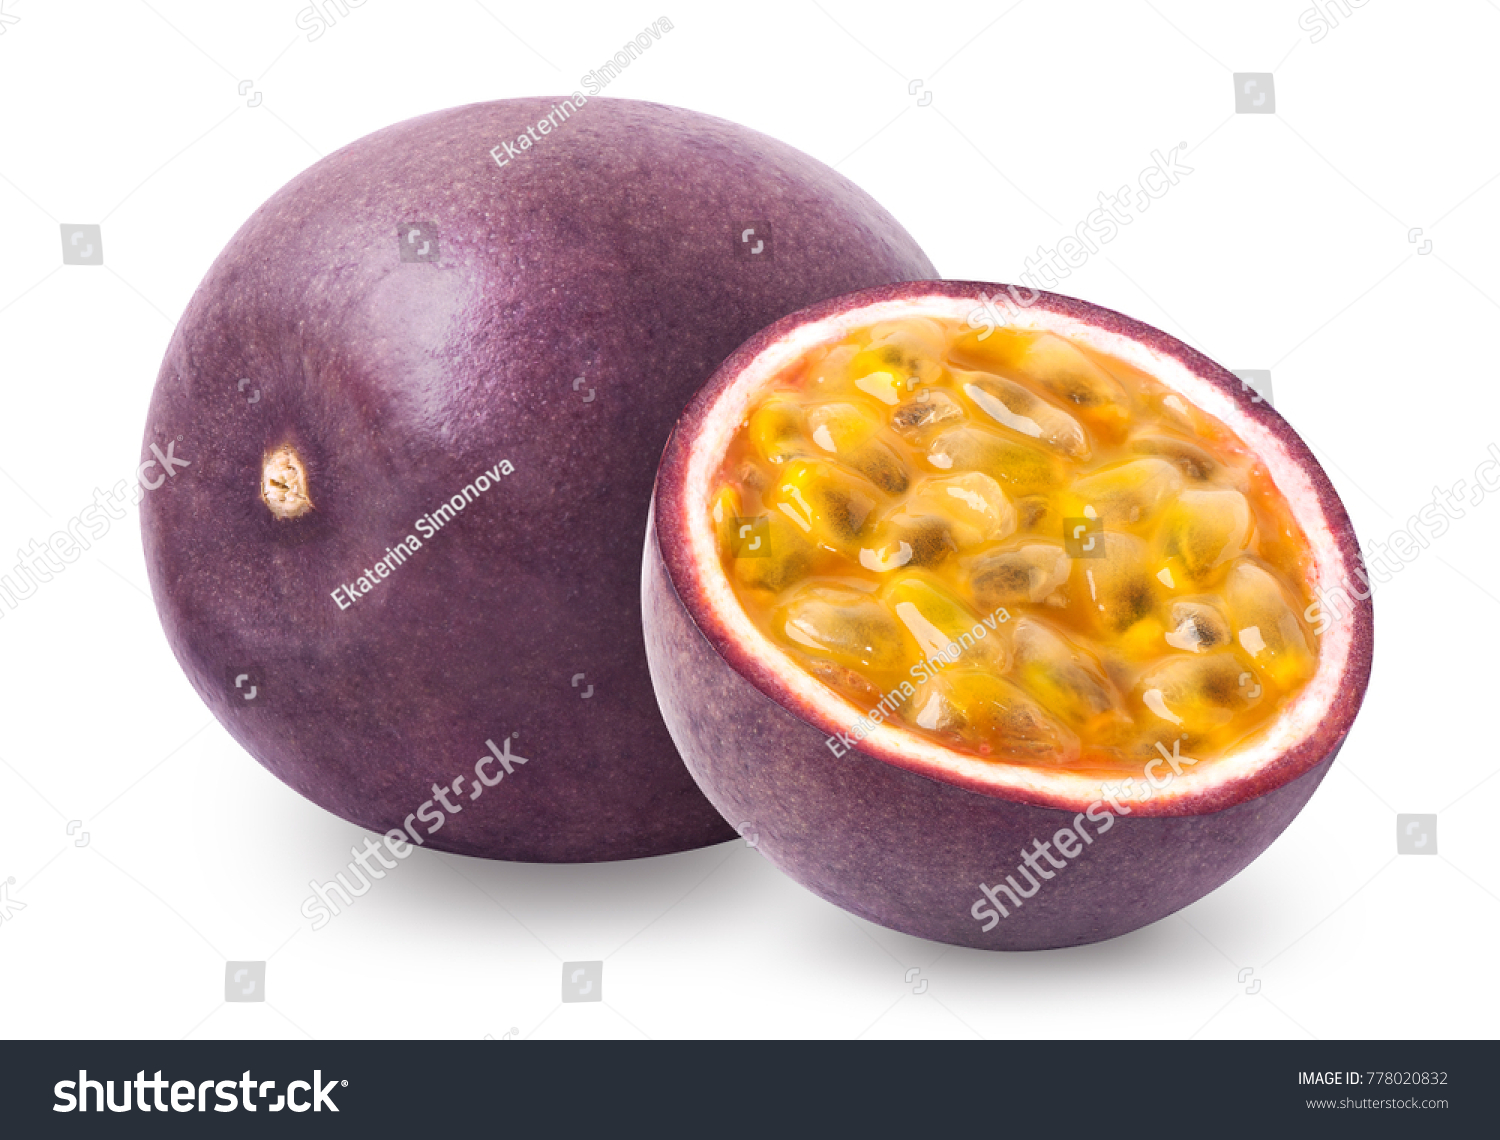 Passion fruit isolated. Whole passionfruit and a half of maracuya isolated on white background. Clipping path included. #778020832